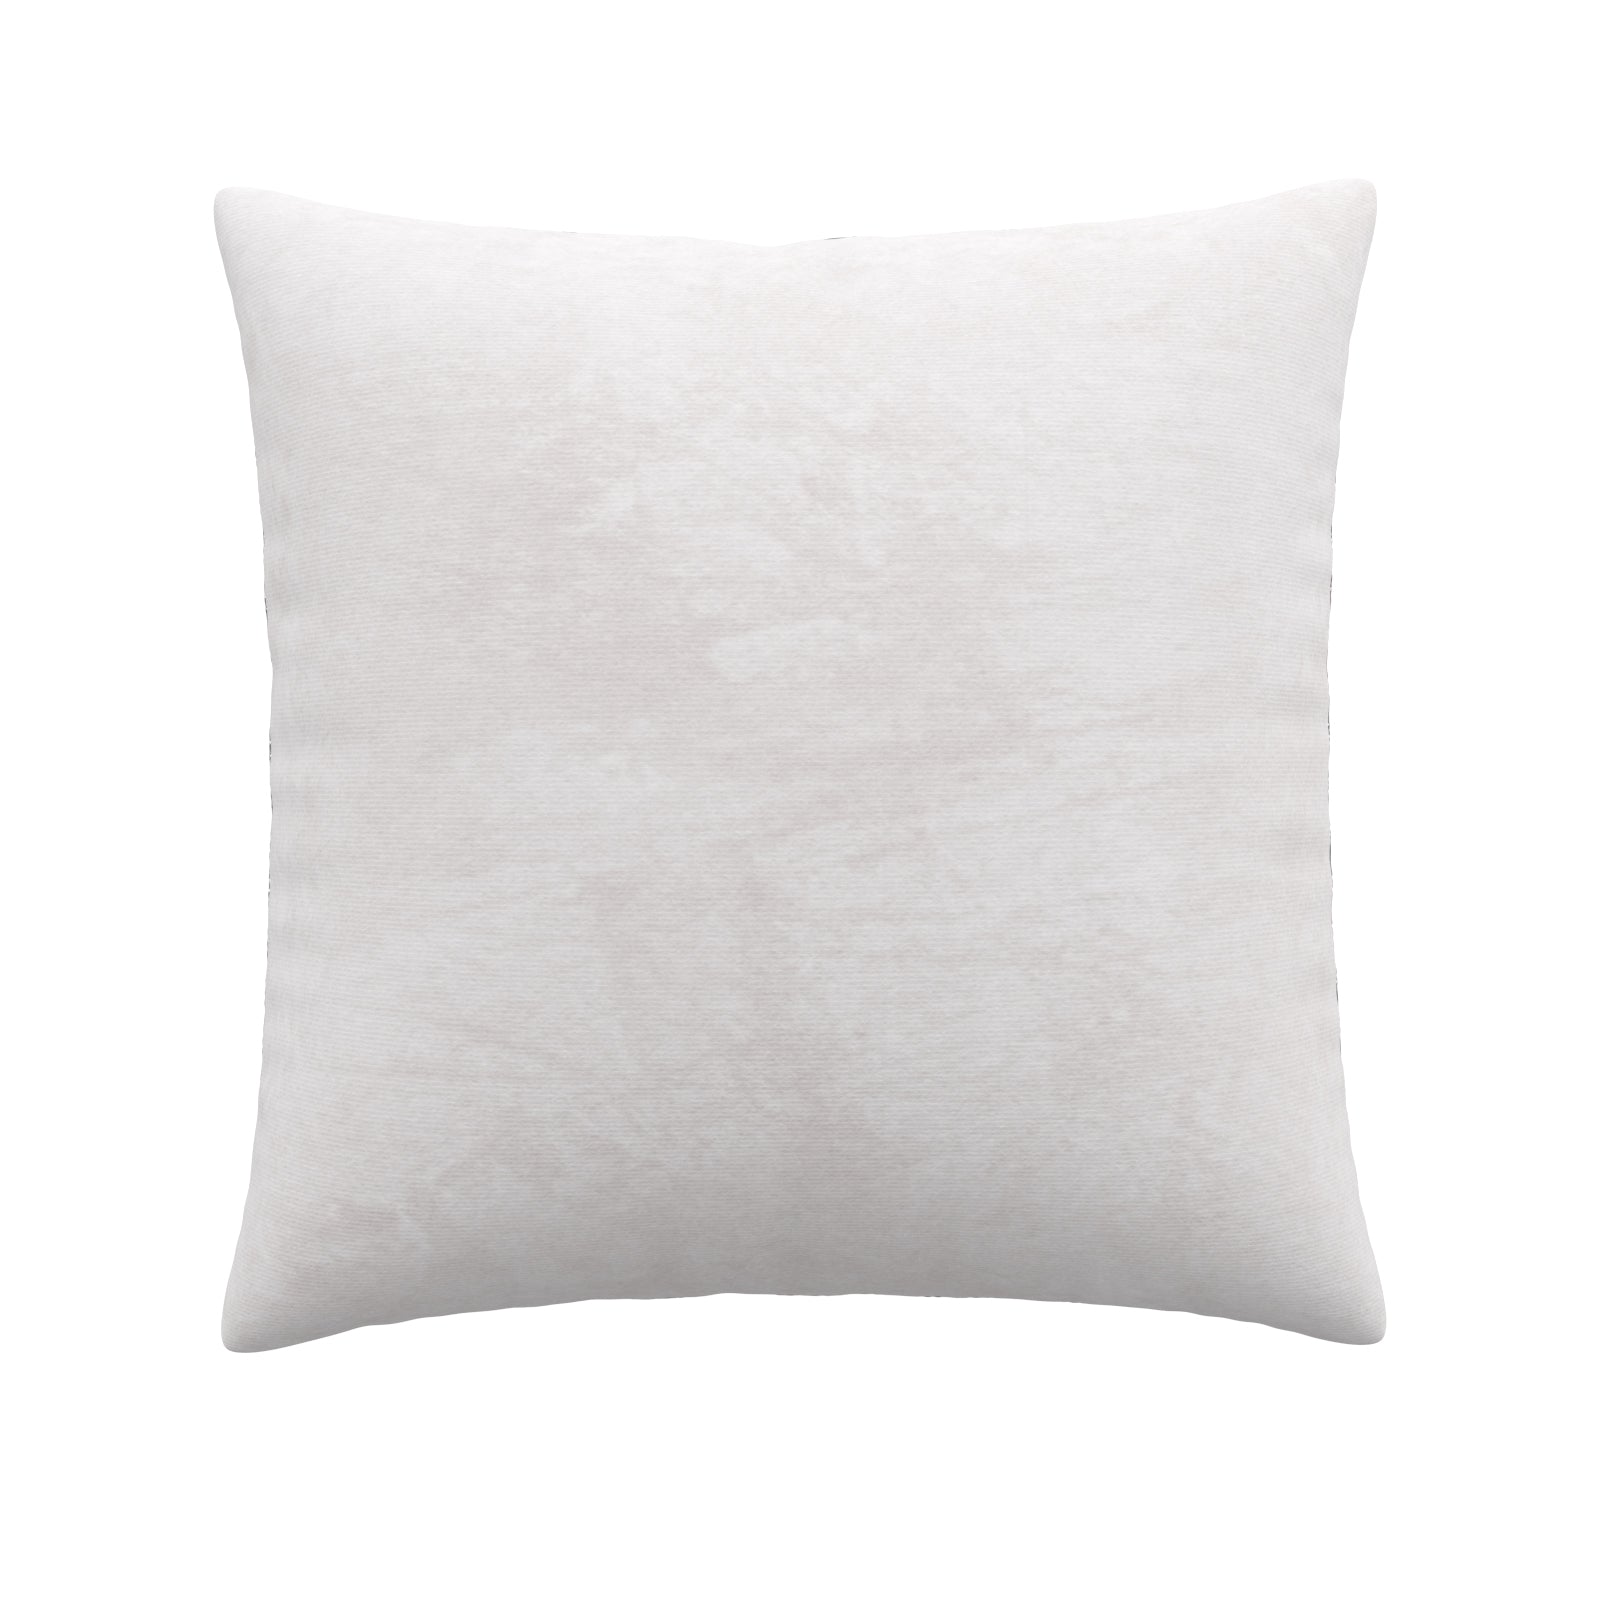 Silver Star pattern leather pillow case | 18''×18'' | P100